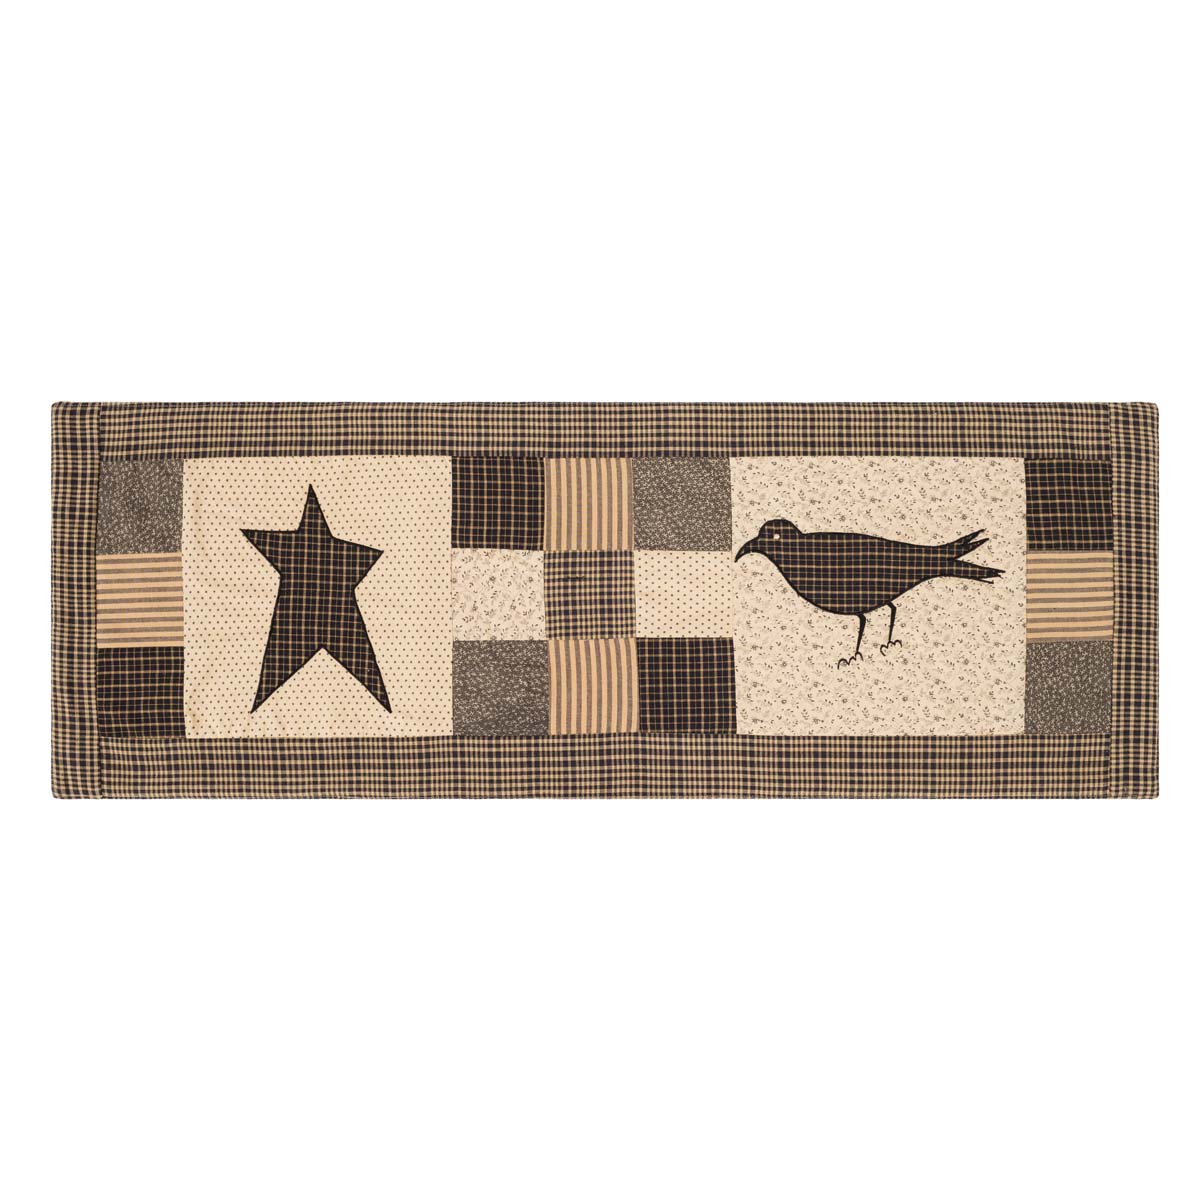 Kettle Grove Runner Crow and Star 13x36